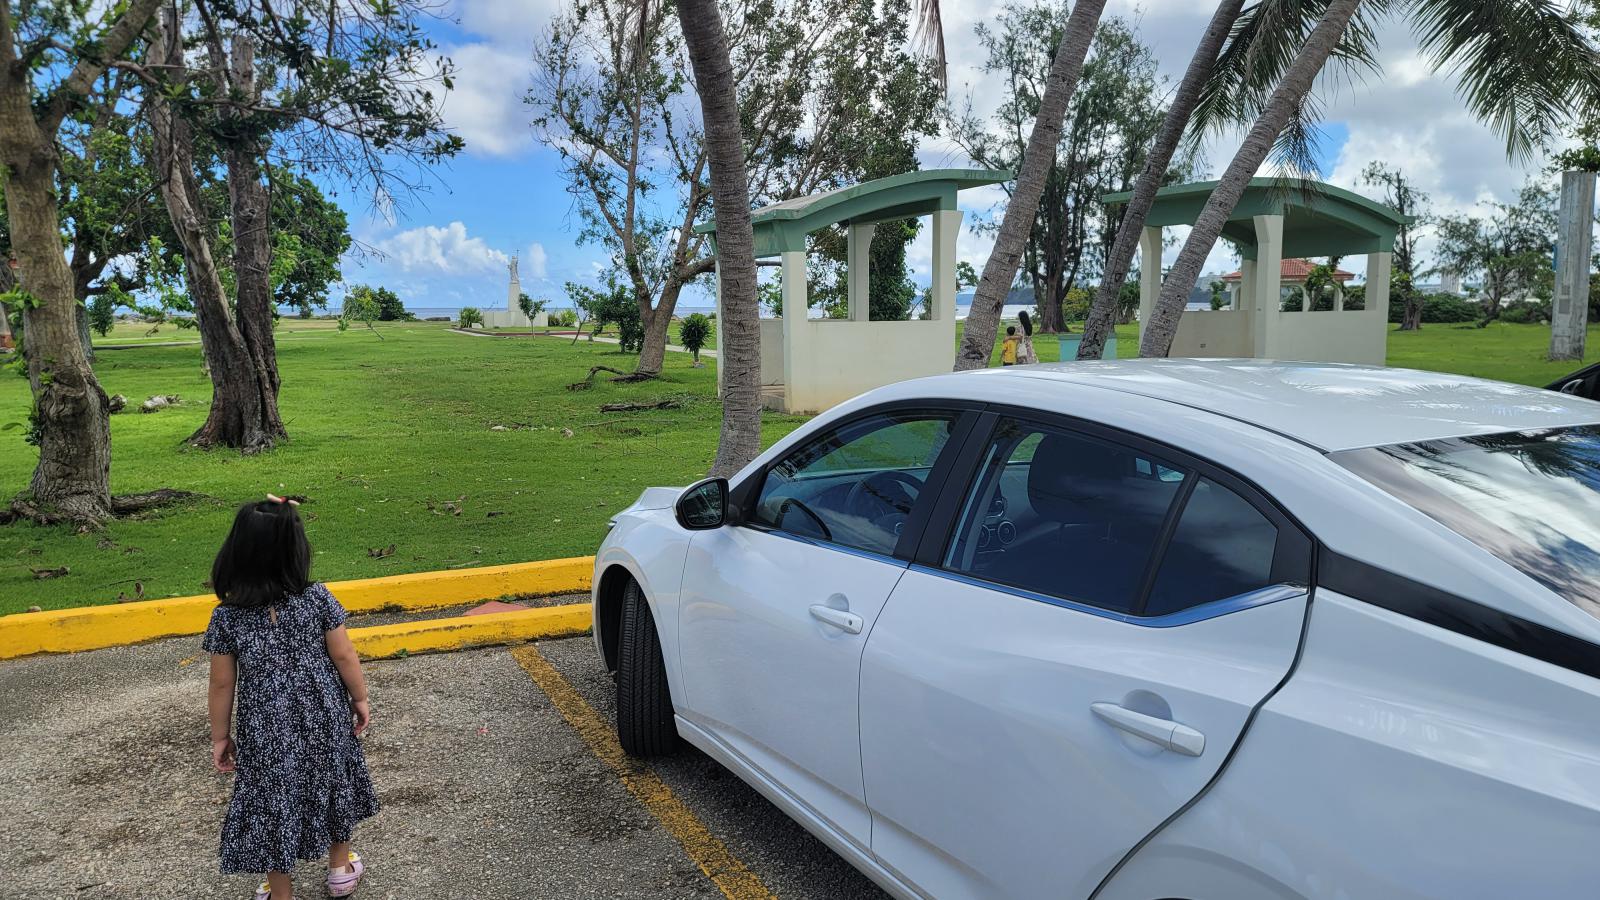 I made a reservation for Sentra 3 days before entering Guam (72 hours). Although I made a late reservation, it was a fully washed car with only 4,000 miles on it, and I used it well for 4 days and 3 nights. The gas cost was $18.